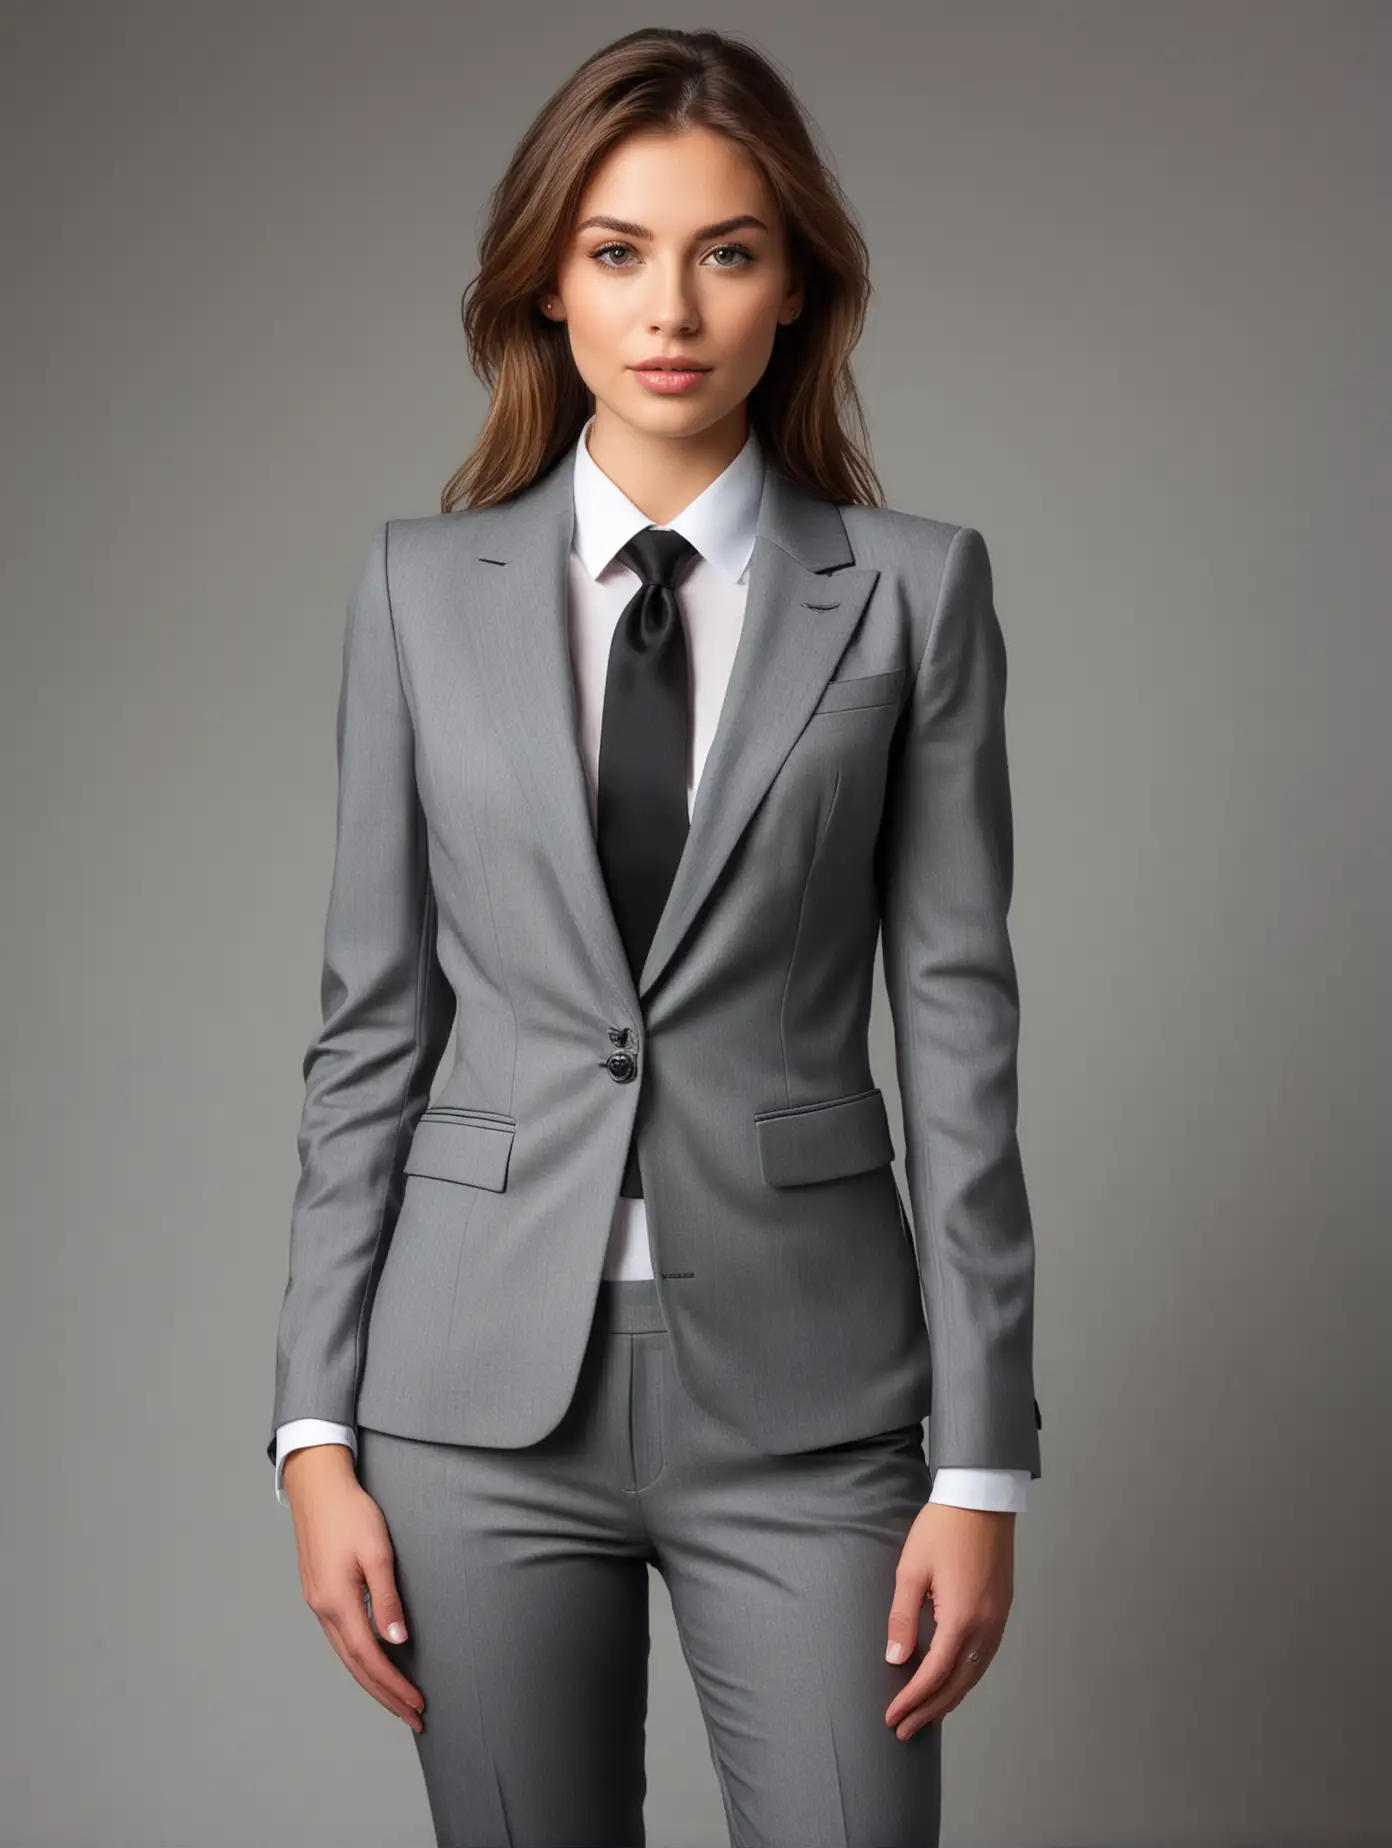 Professional Business Attire Photoshoot Elegant Suits and Exquisite Facial Features